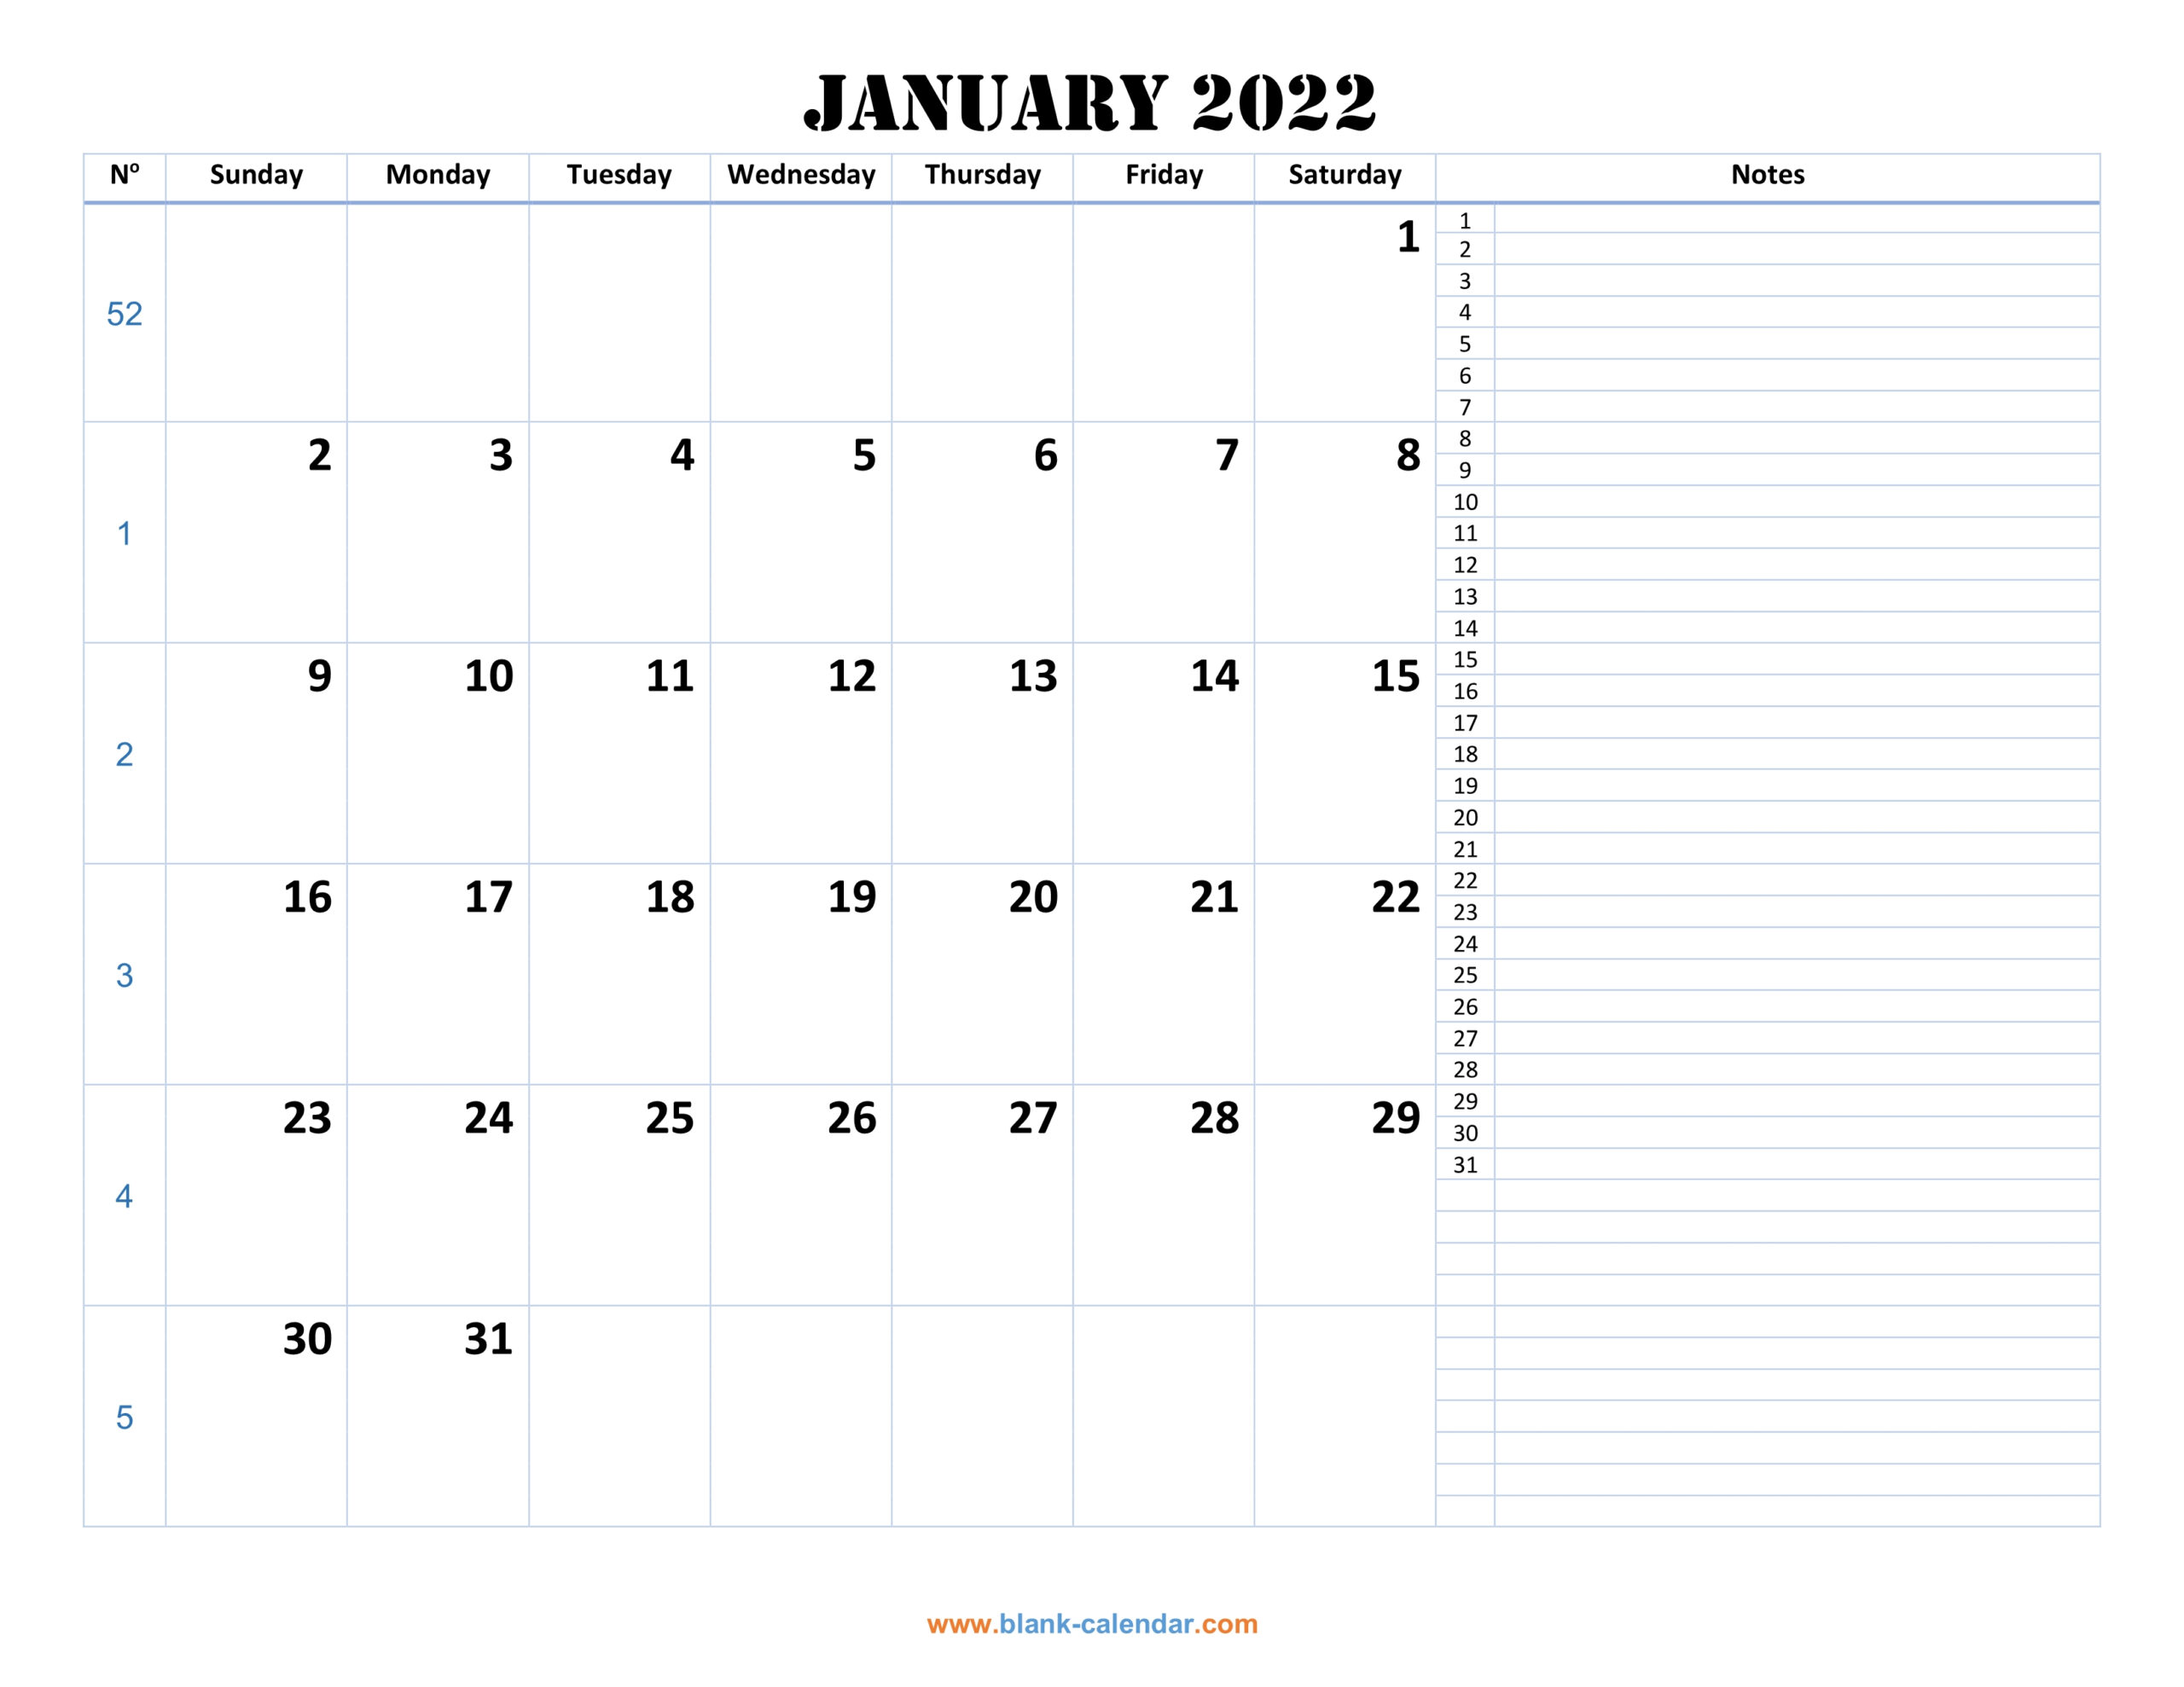 Monthly Calendar 2022 | Free Download, Editable And Printable within Free 2022 Monthly Calendars That Are Printable